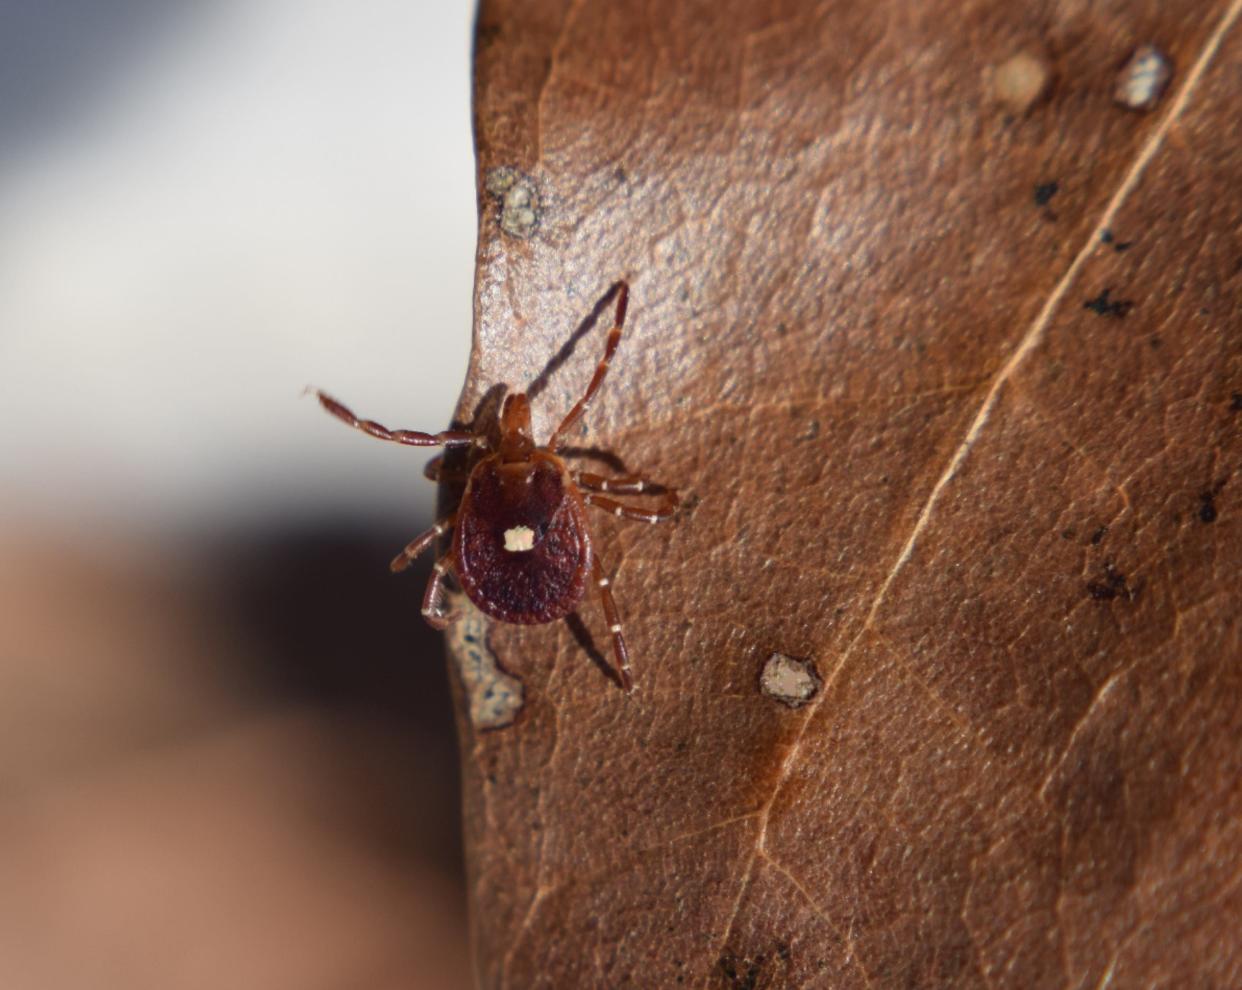 A Lone Star tick (Amblyomma americanum) a species that is extending its range — and the range of the diseases it carries — due to climate and habitat change. Historically considered a “Southern” tick, it’s now becoming widespread in Northeast and upper Midwest.